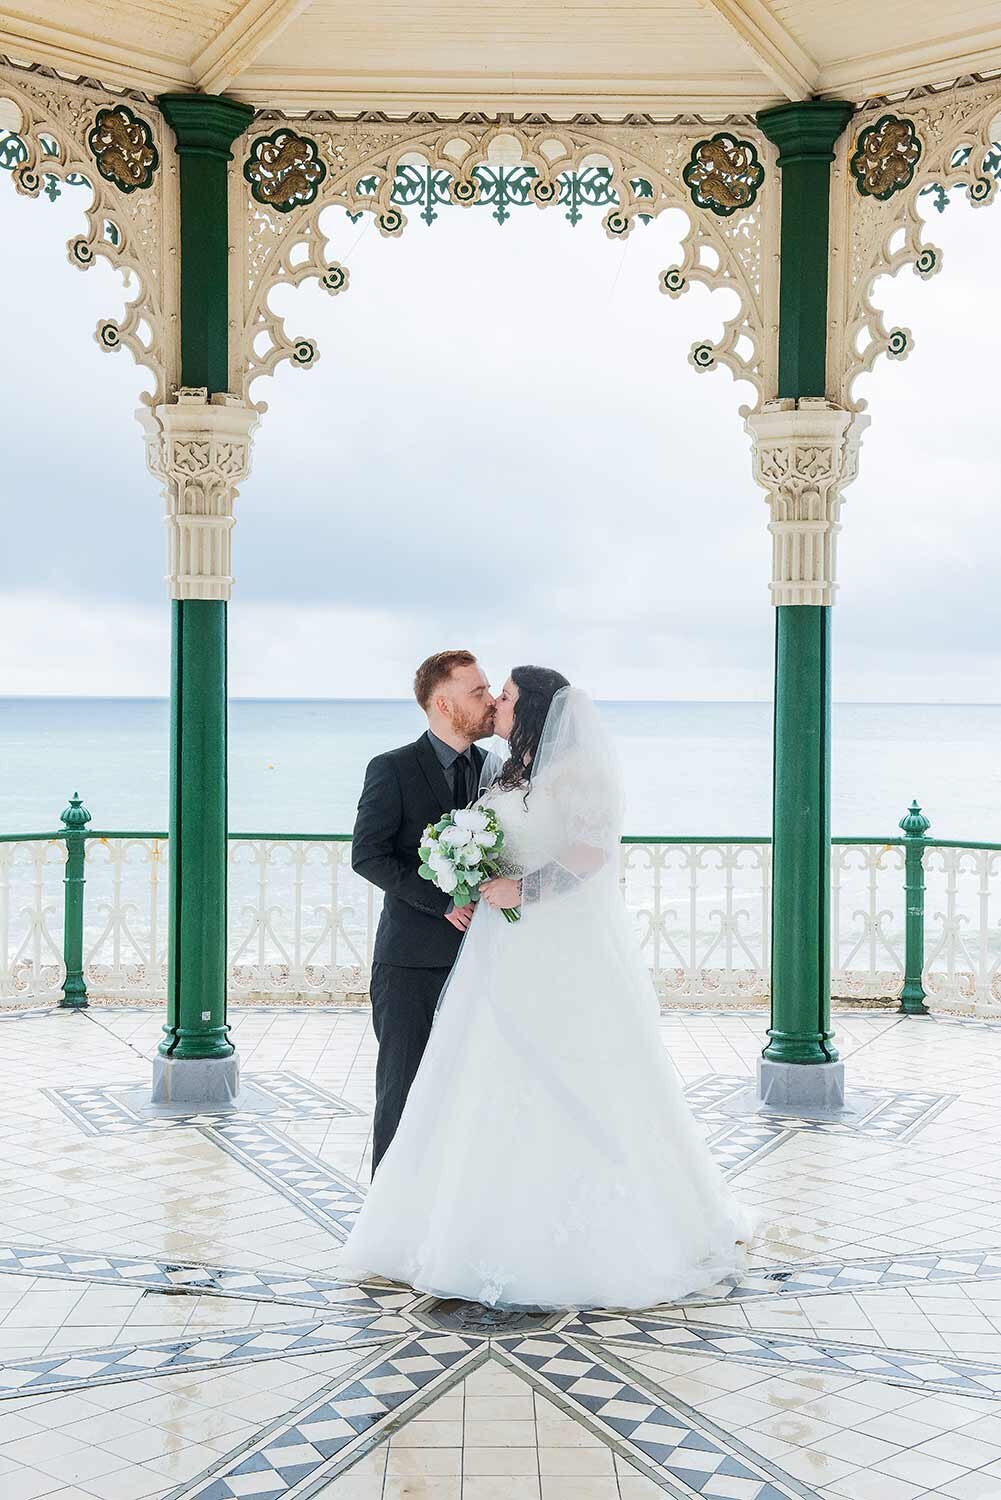 Bride and groom couple wedding portrait brighton band stand